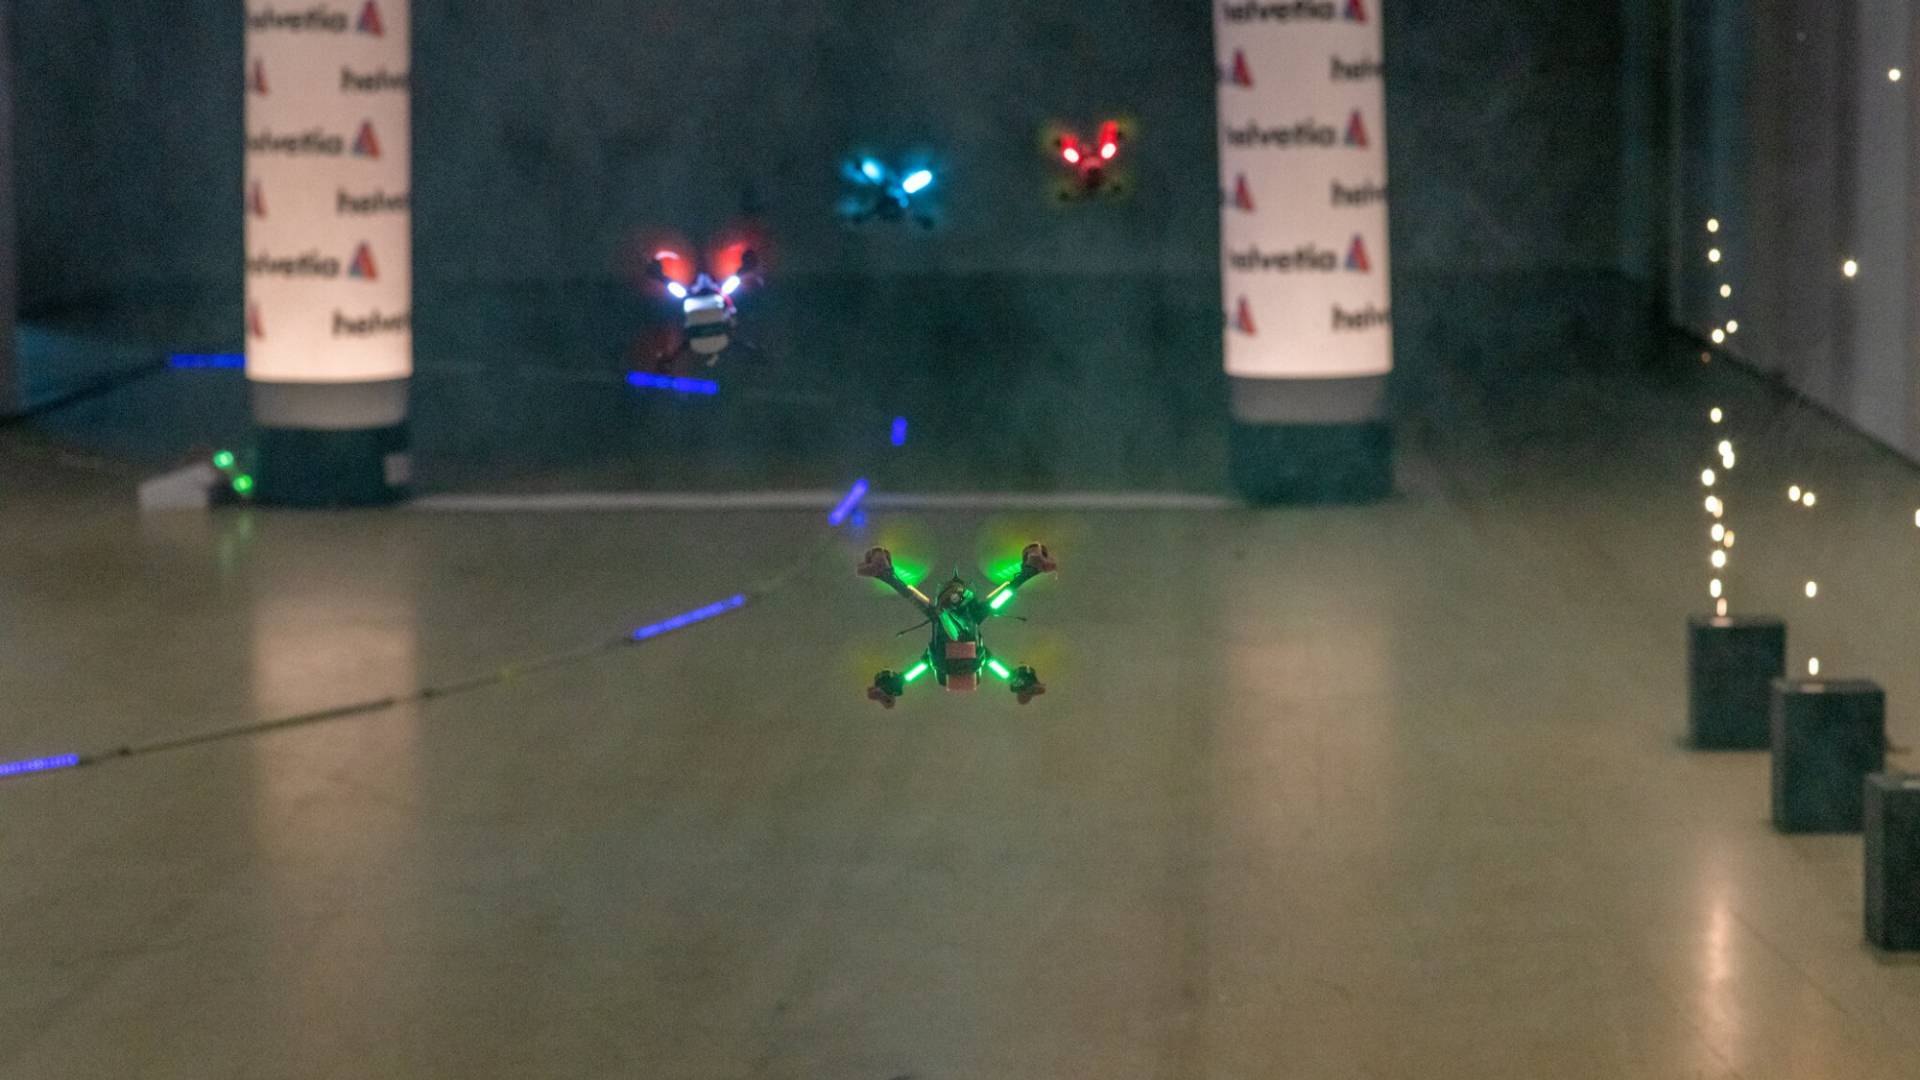 Drones fly around obstacles along the race course.